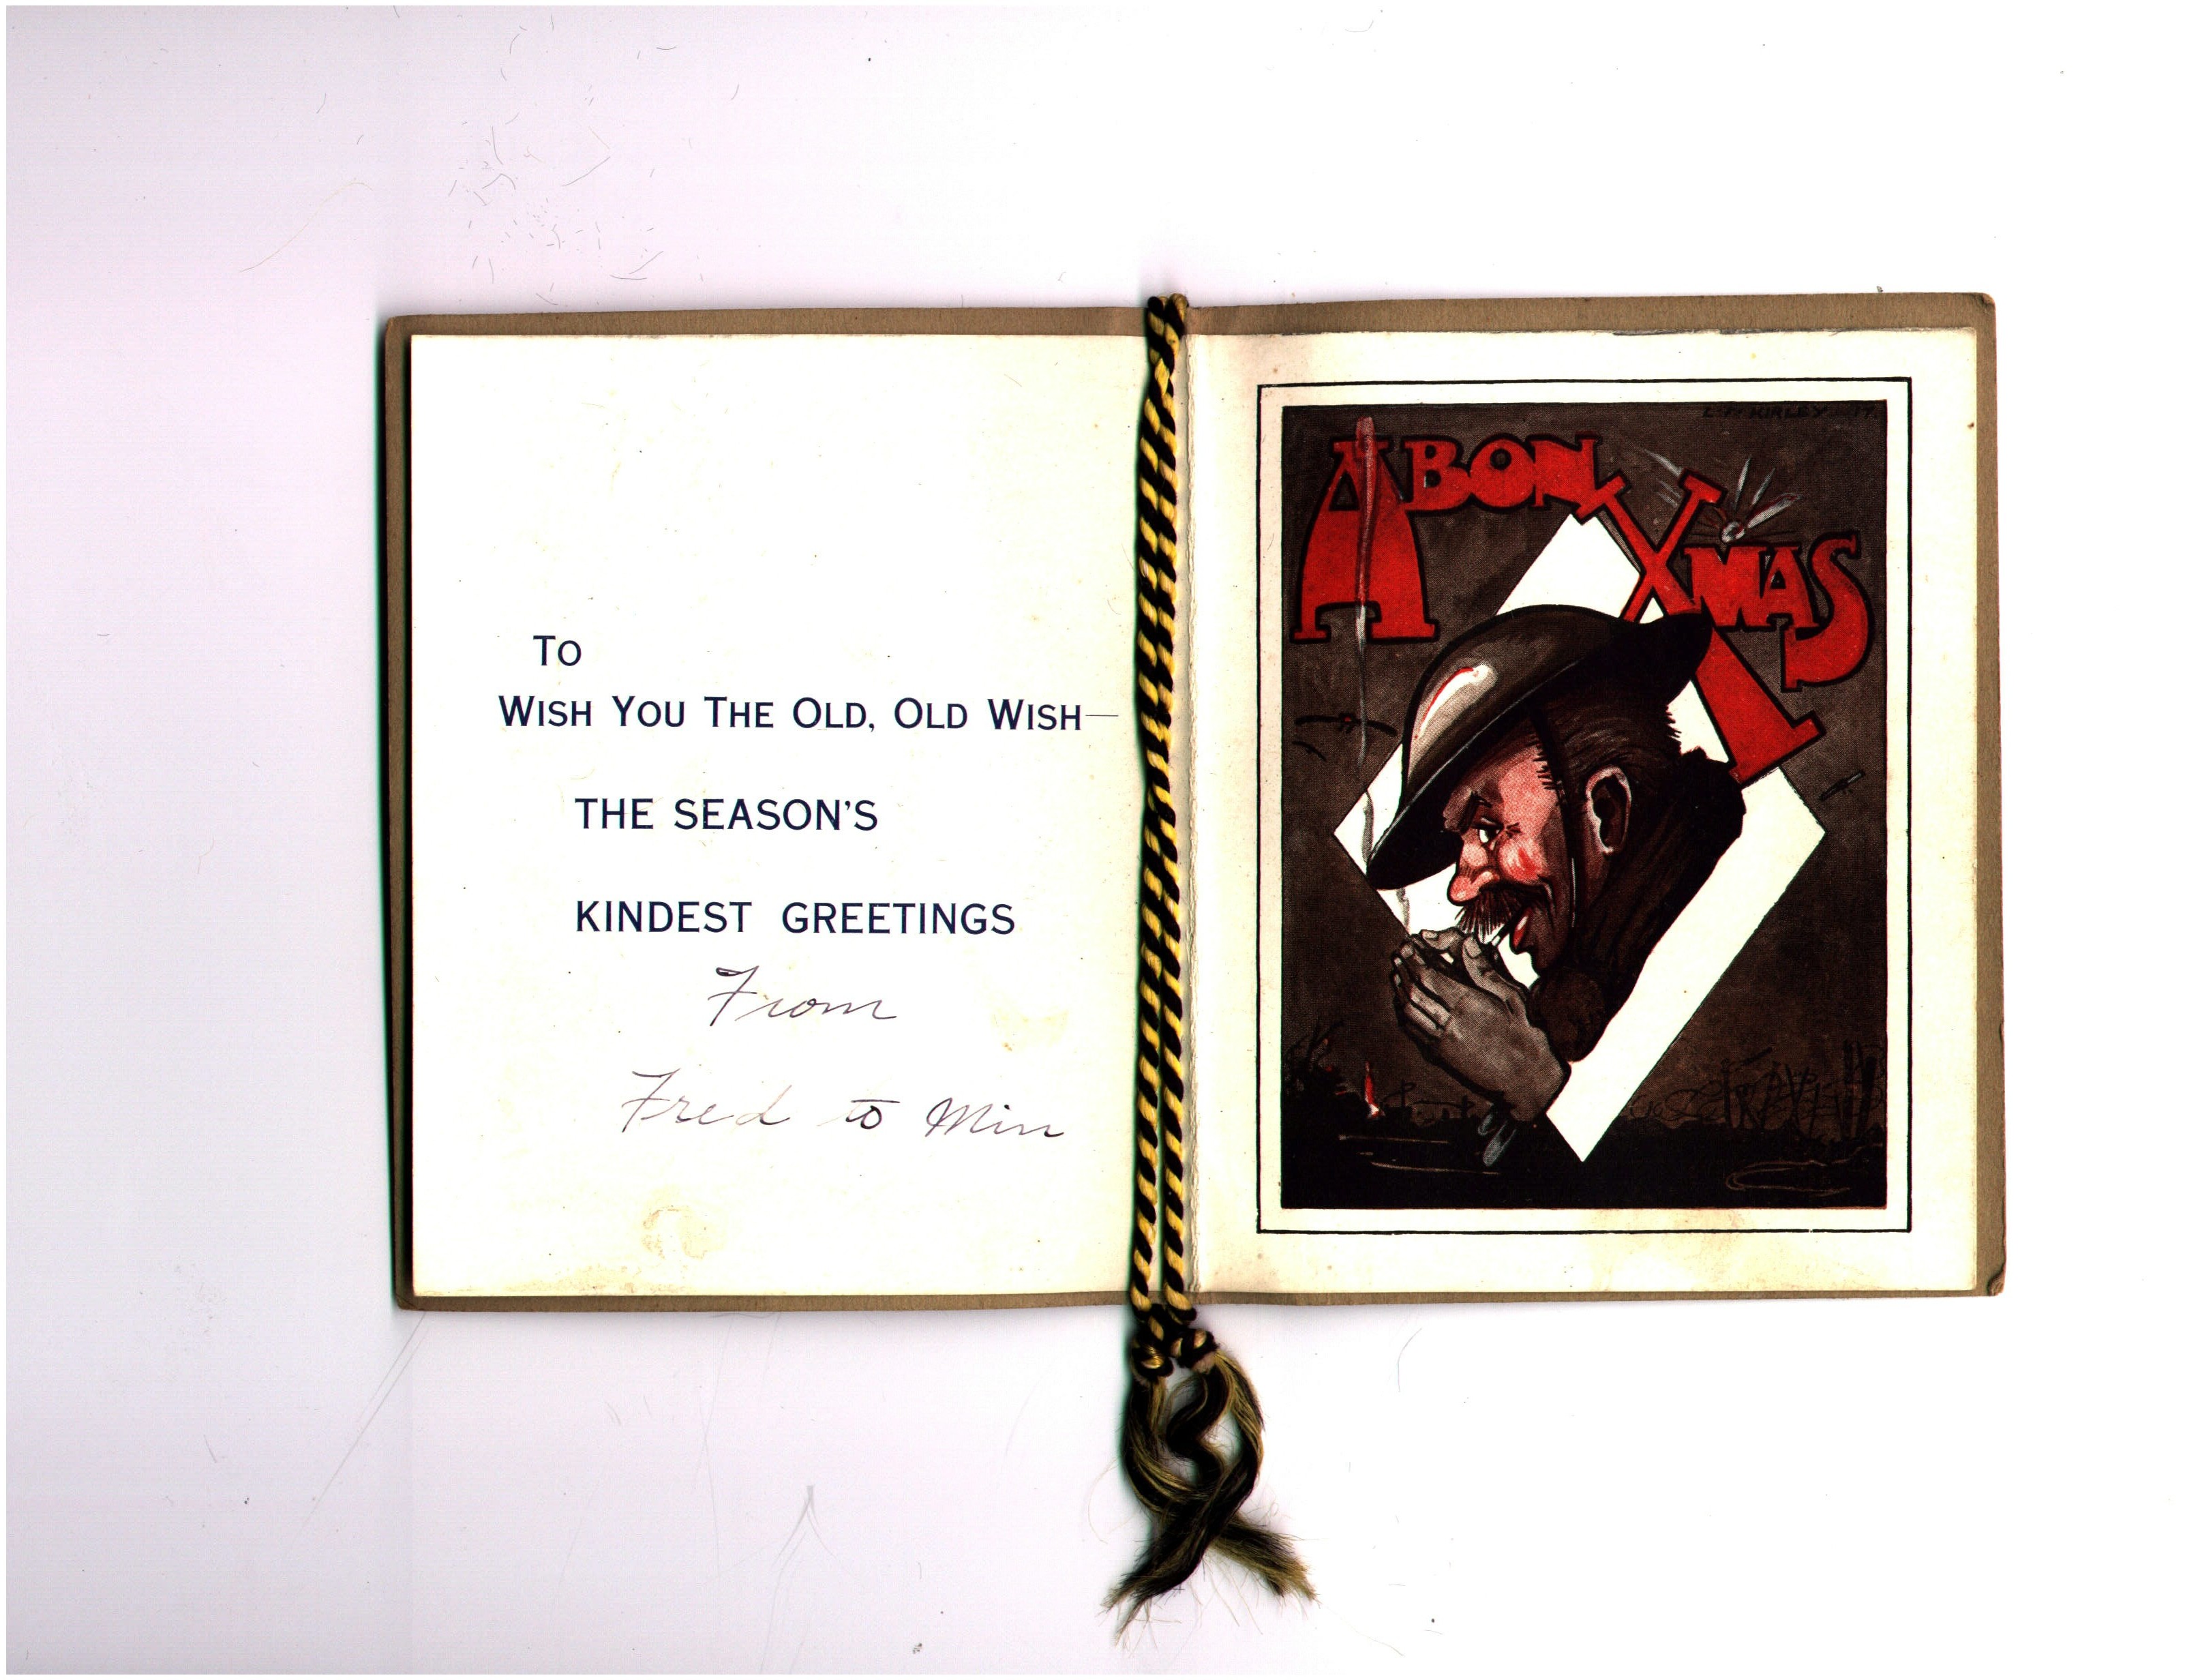 Inside, 19th Battalion Officer’s Christmas Card, 1917. The fictional character depicted is Old Bill, the work of cartoonist Bruce Bairnsfather.